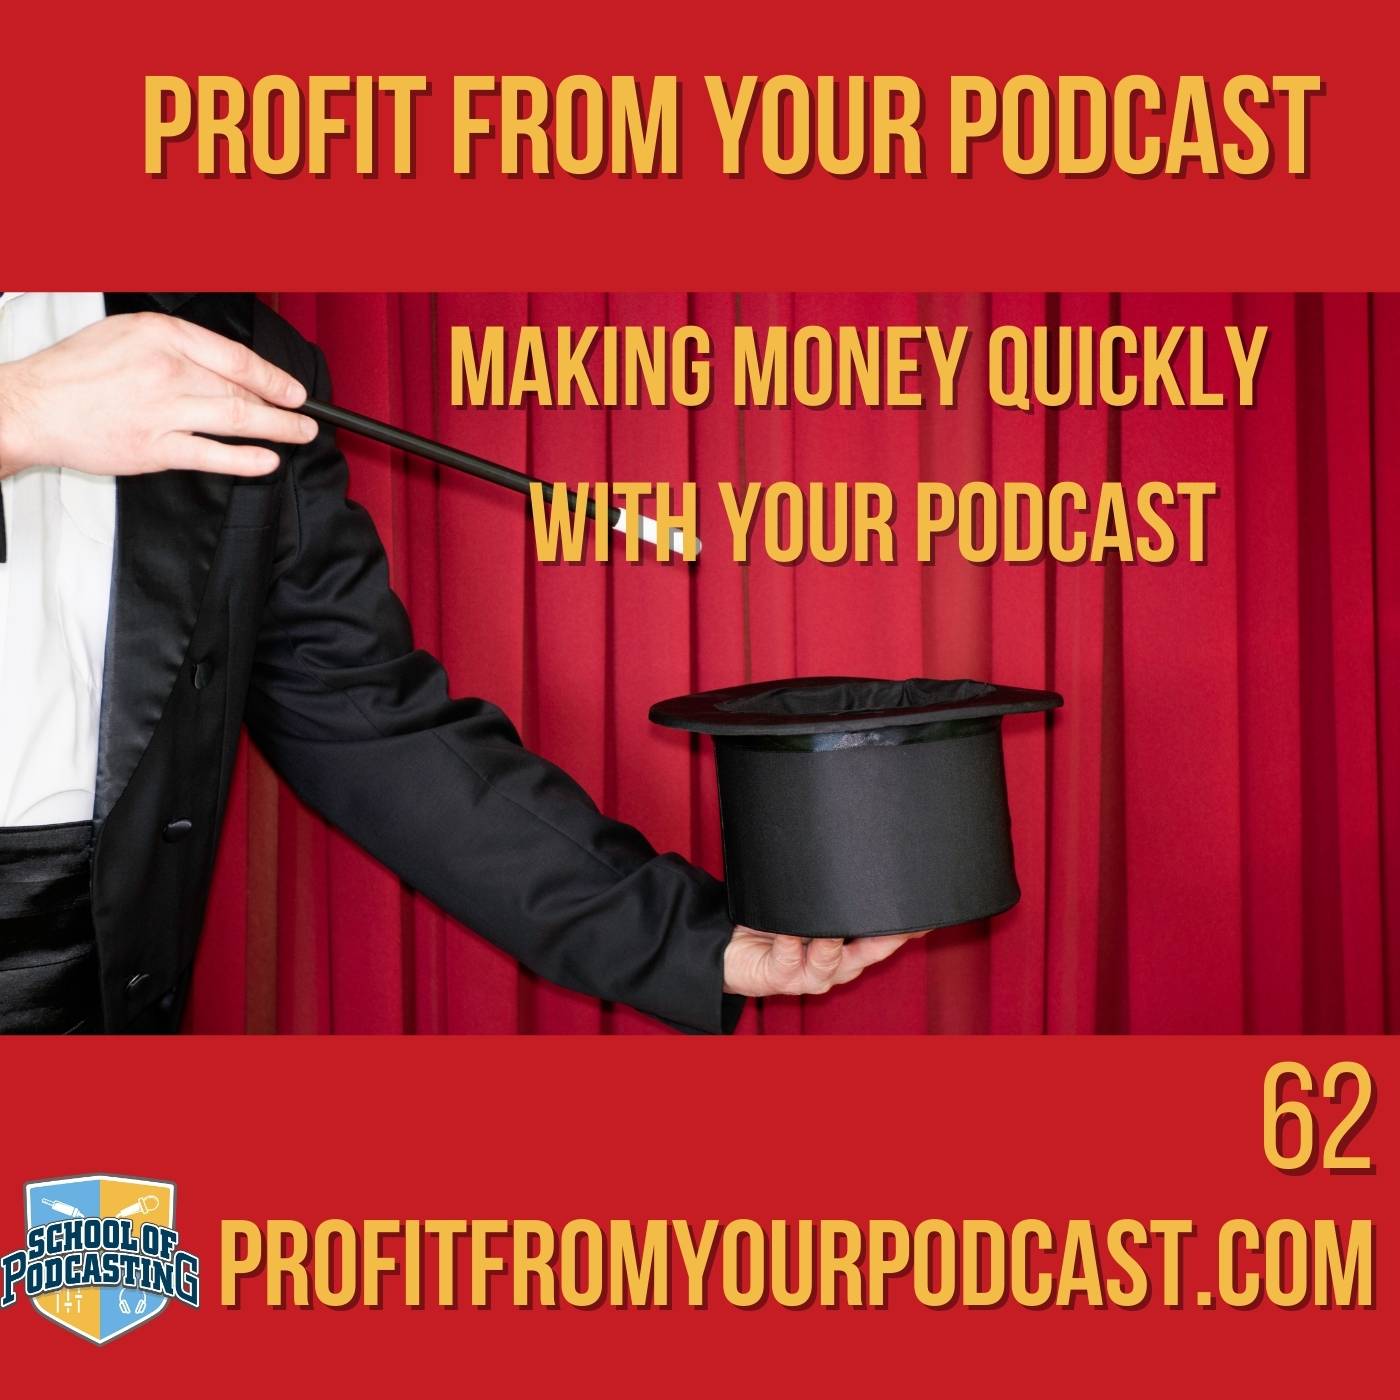 Can You Make $500 Quickly With A Brand New Podcast?